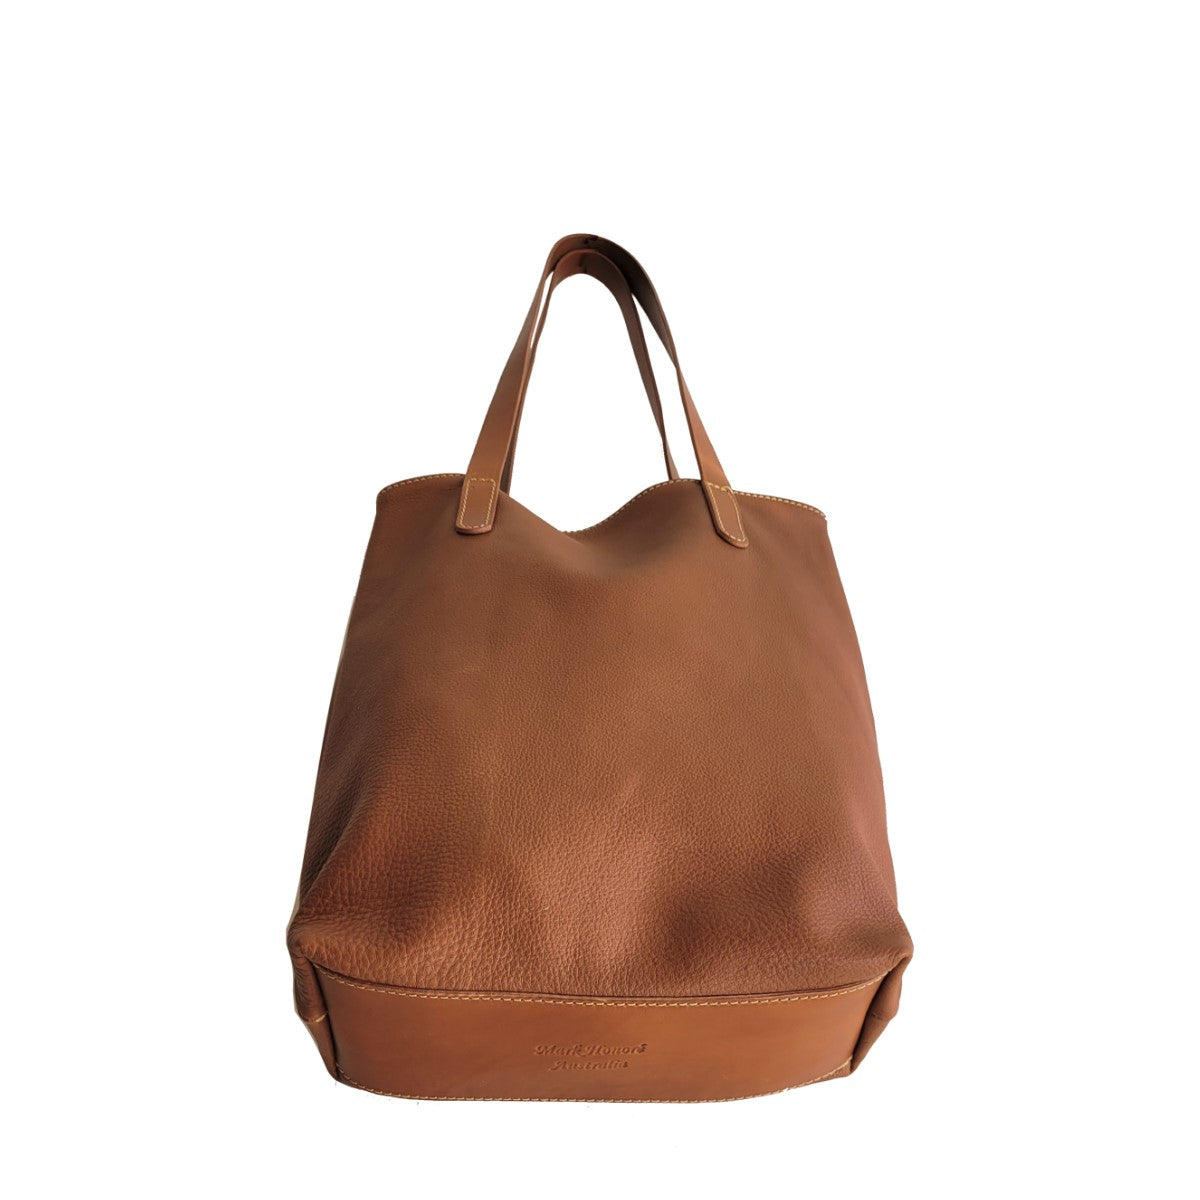 Swags Camille Tote - Tan